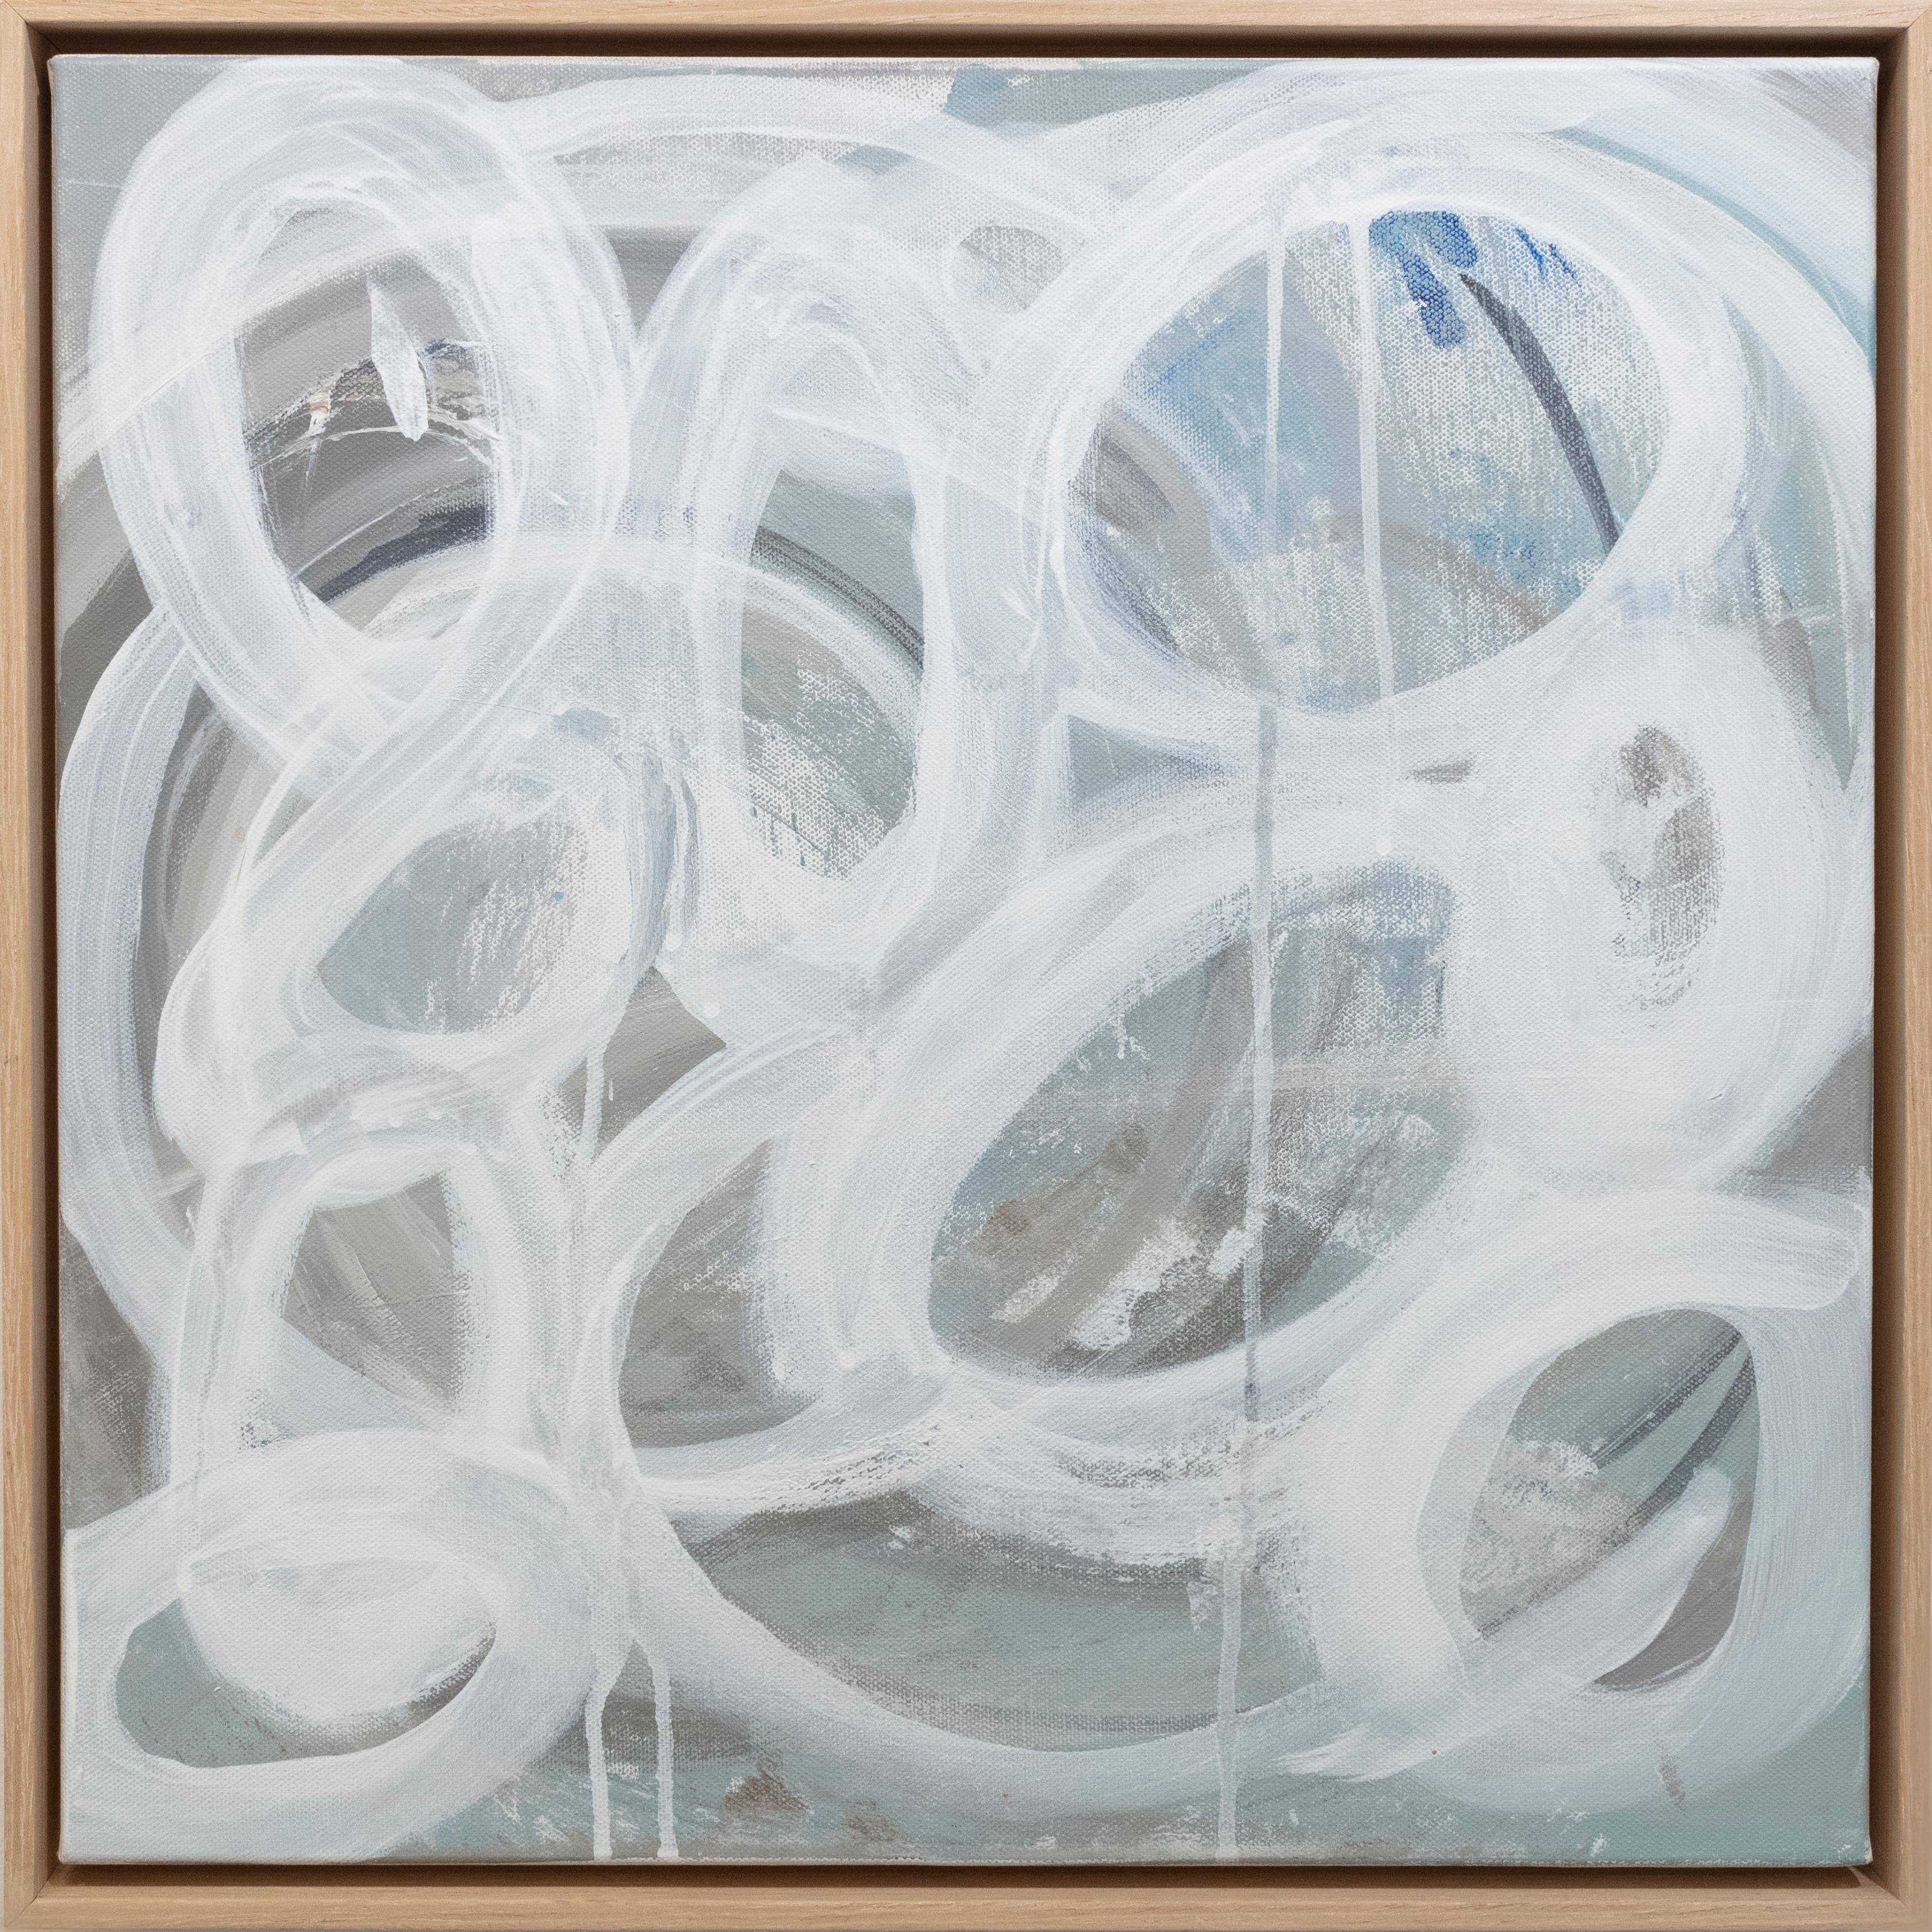 This abstract painting by Sue De Chiara is made with acrylic paint on canvas. It features a light blue-grey palette, with white circular shapes applied in light, loose strokes across the composition. The painting is professionally framed in a light